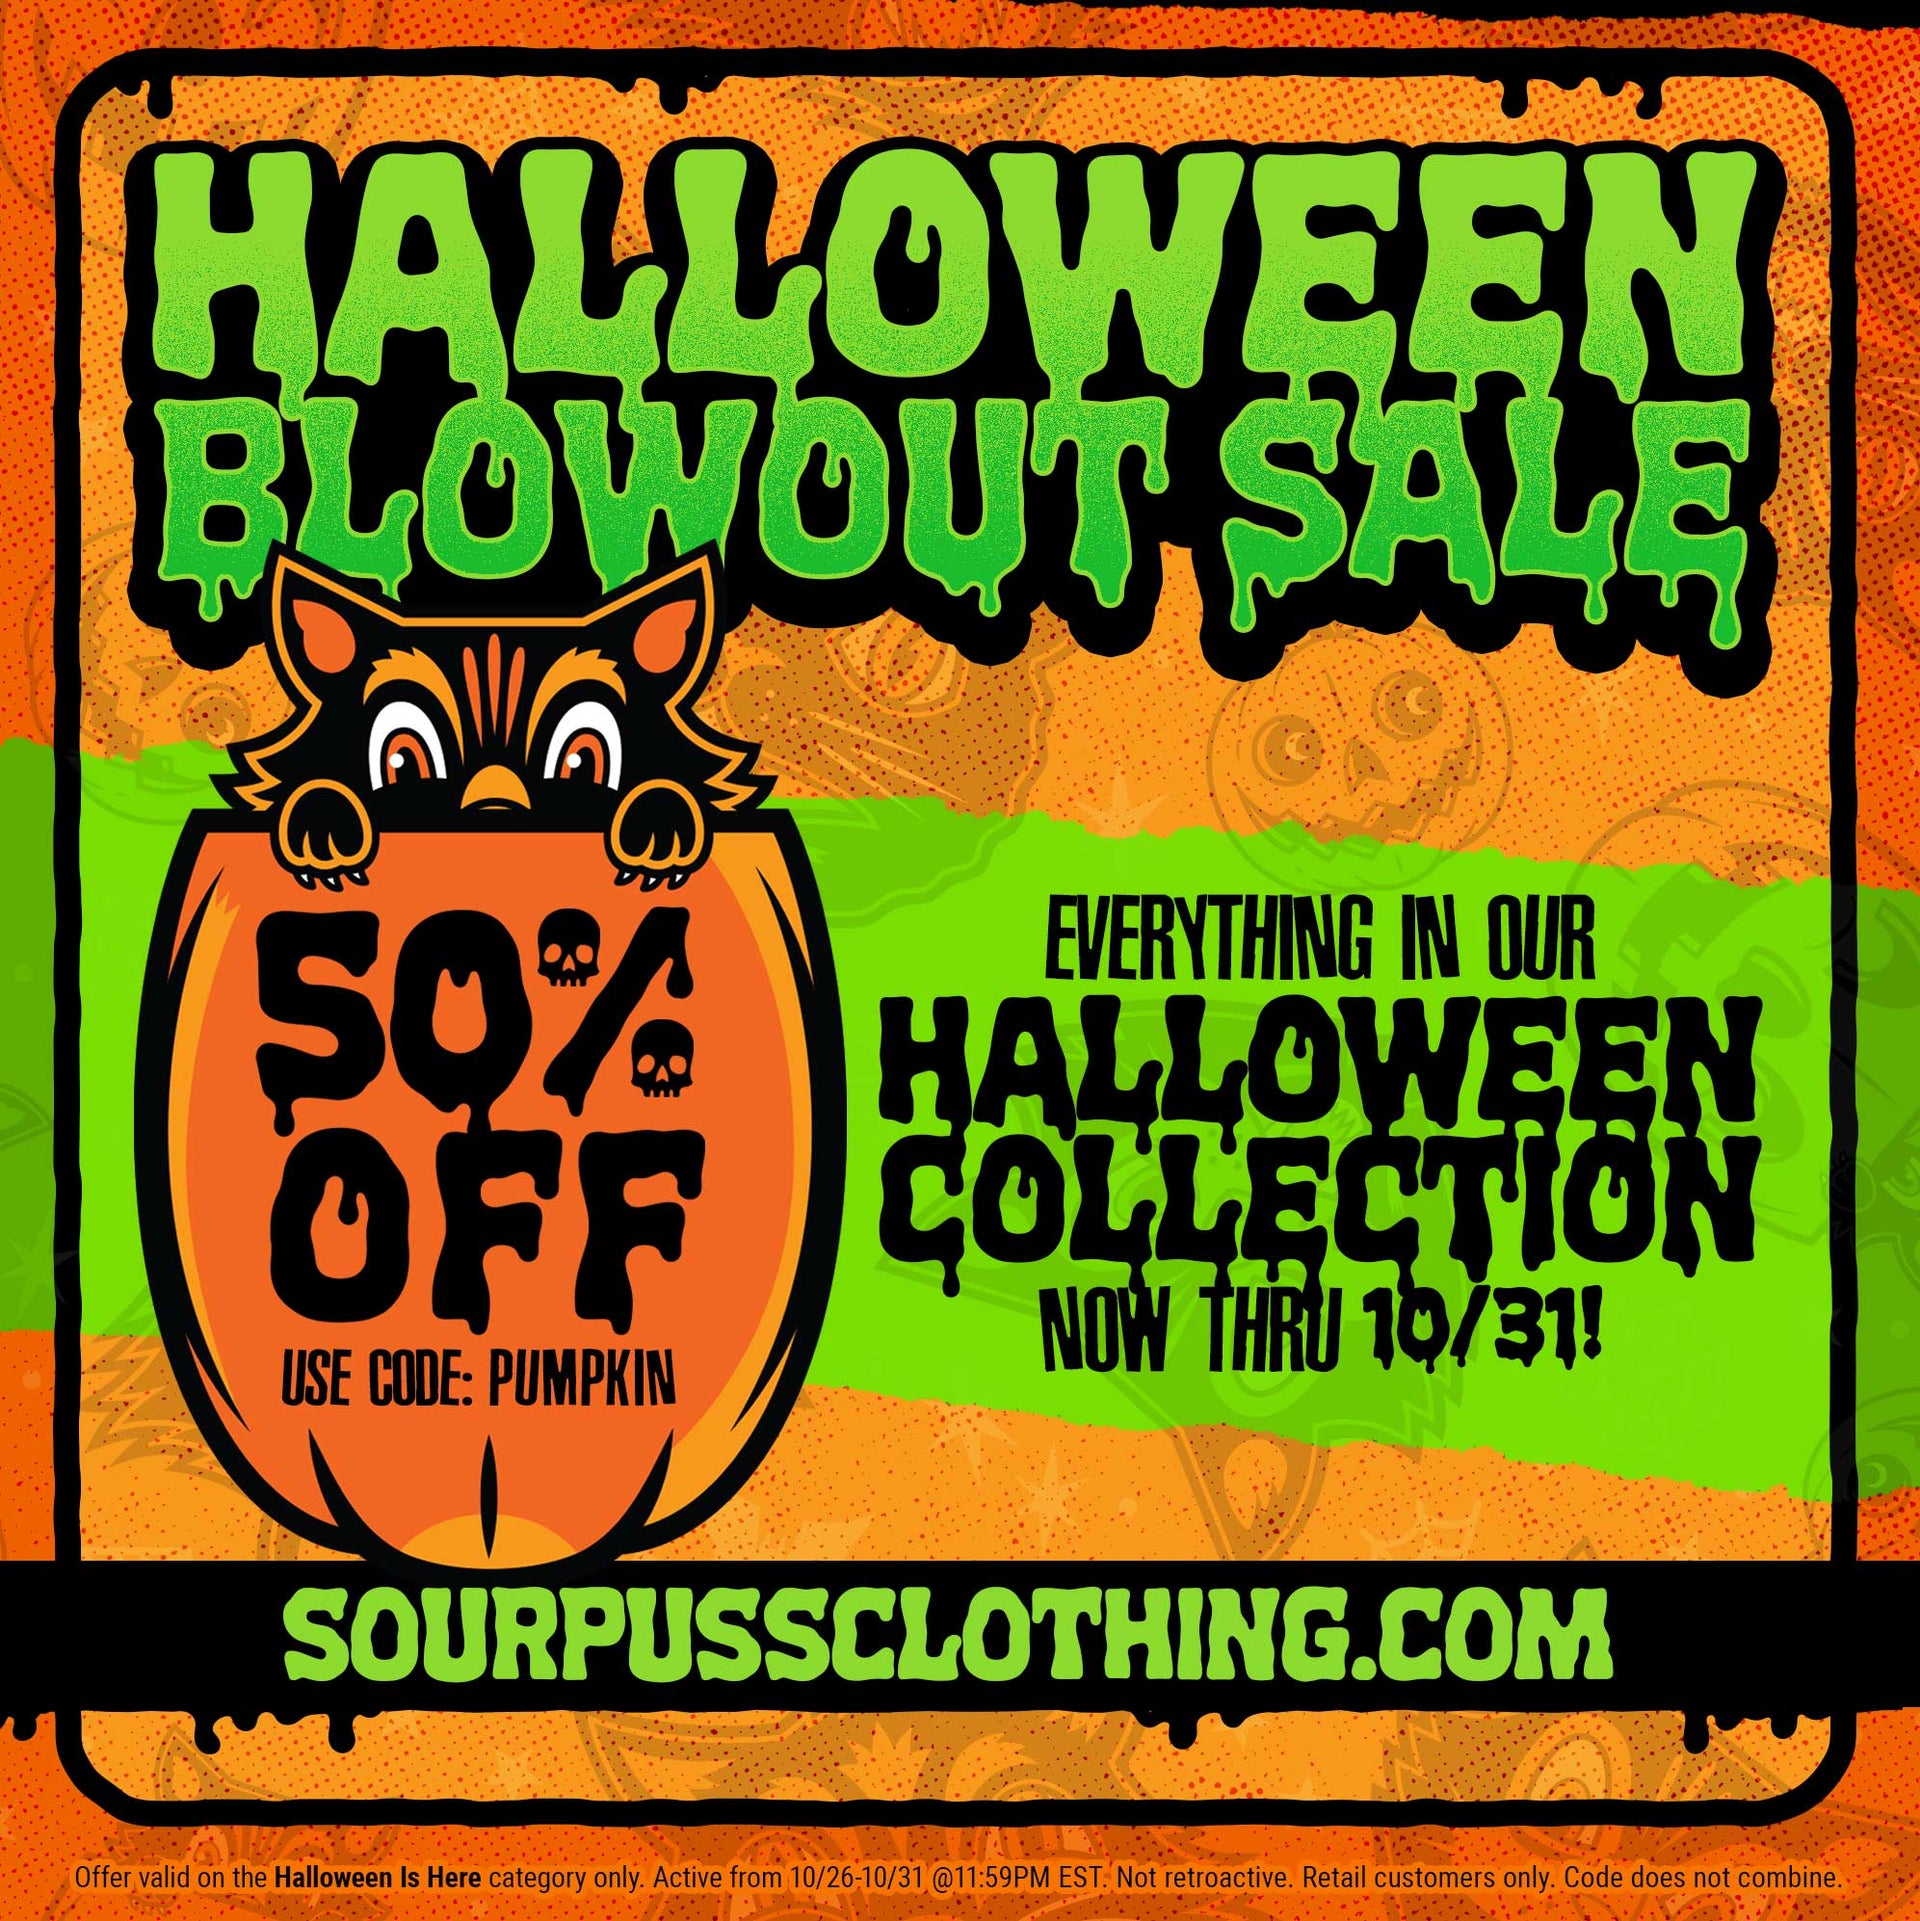 🧡🎃 TRICK OR TREAT! HALLOWEEN BLOW OUT SALE IS HERE! 🎃🧡